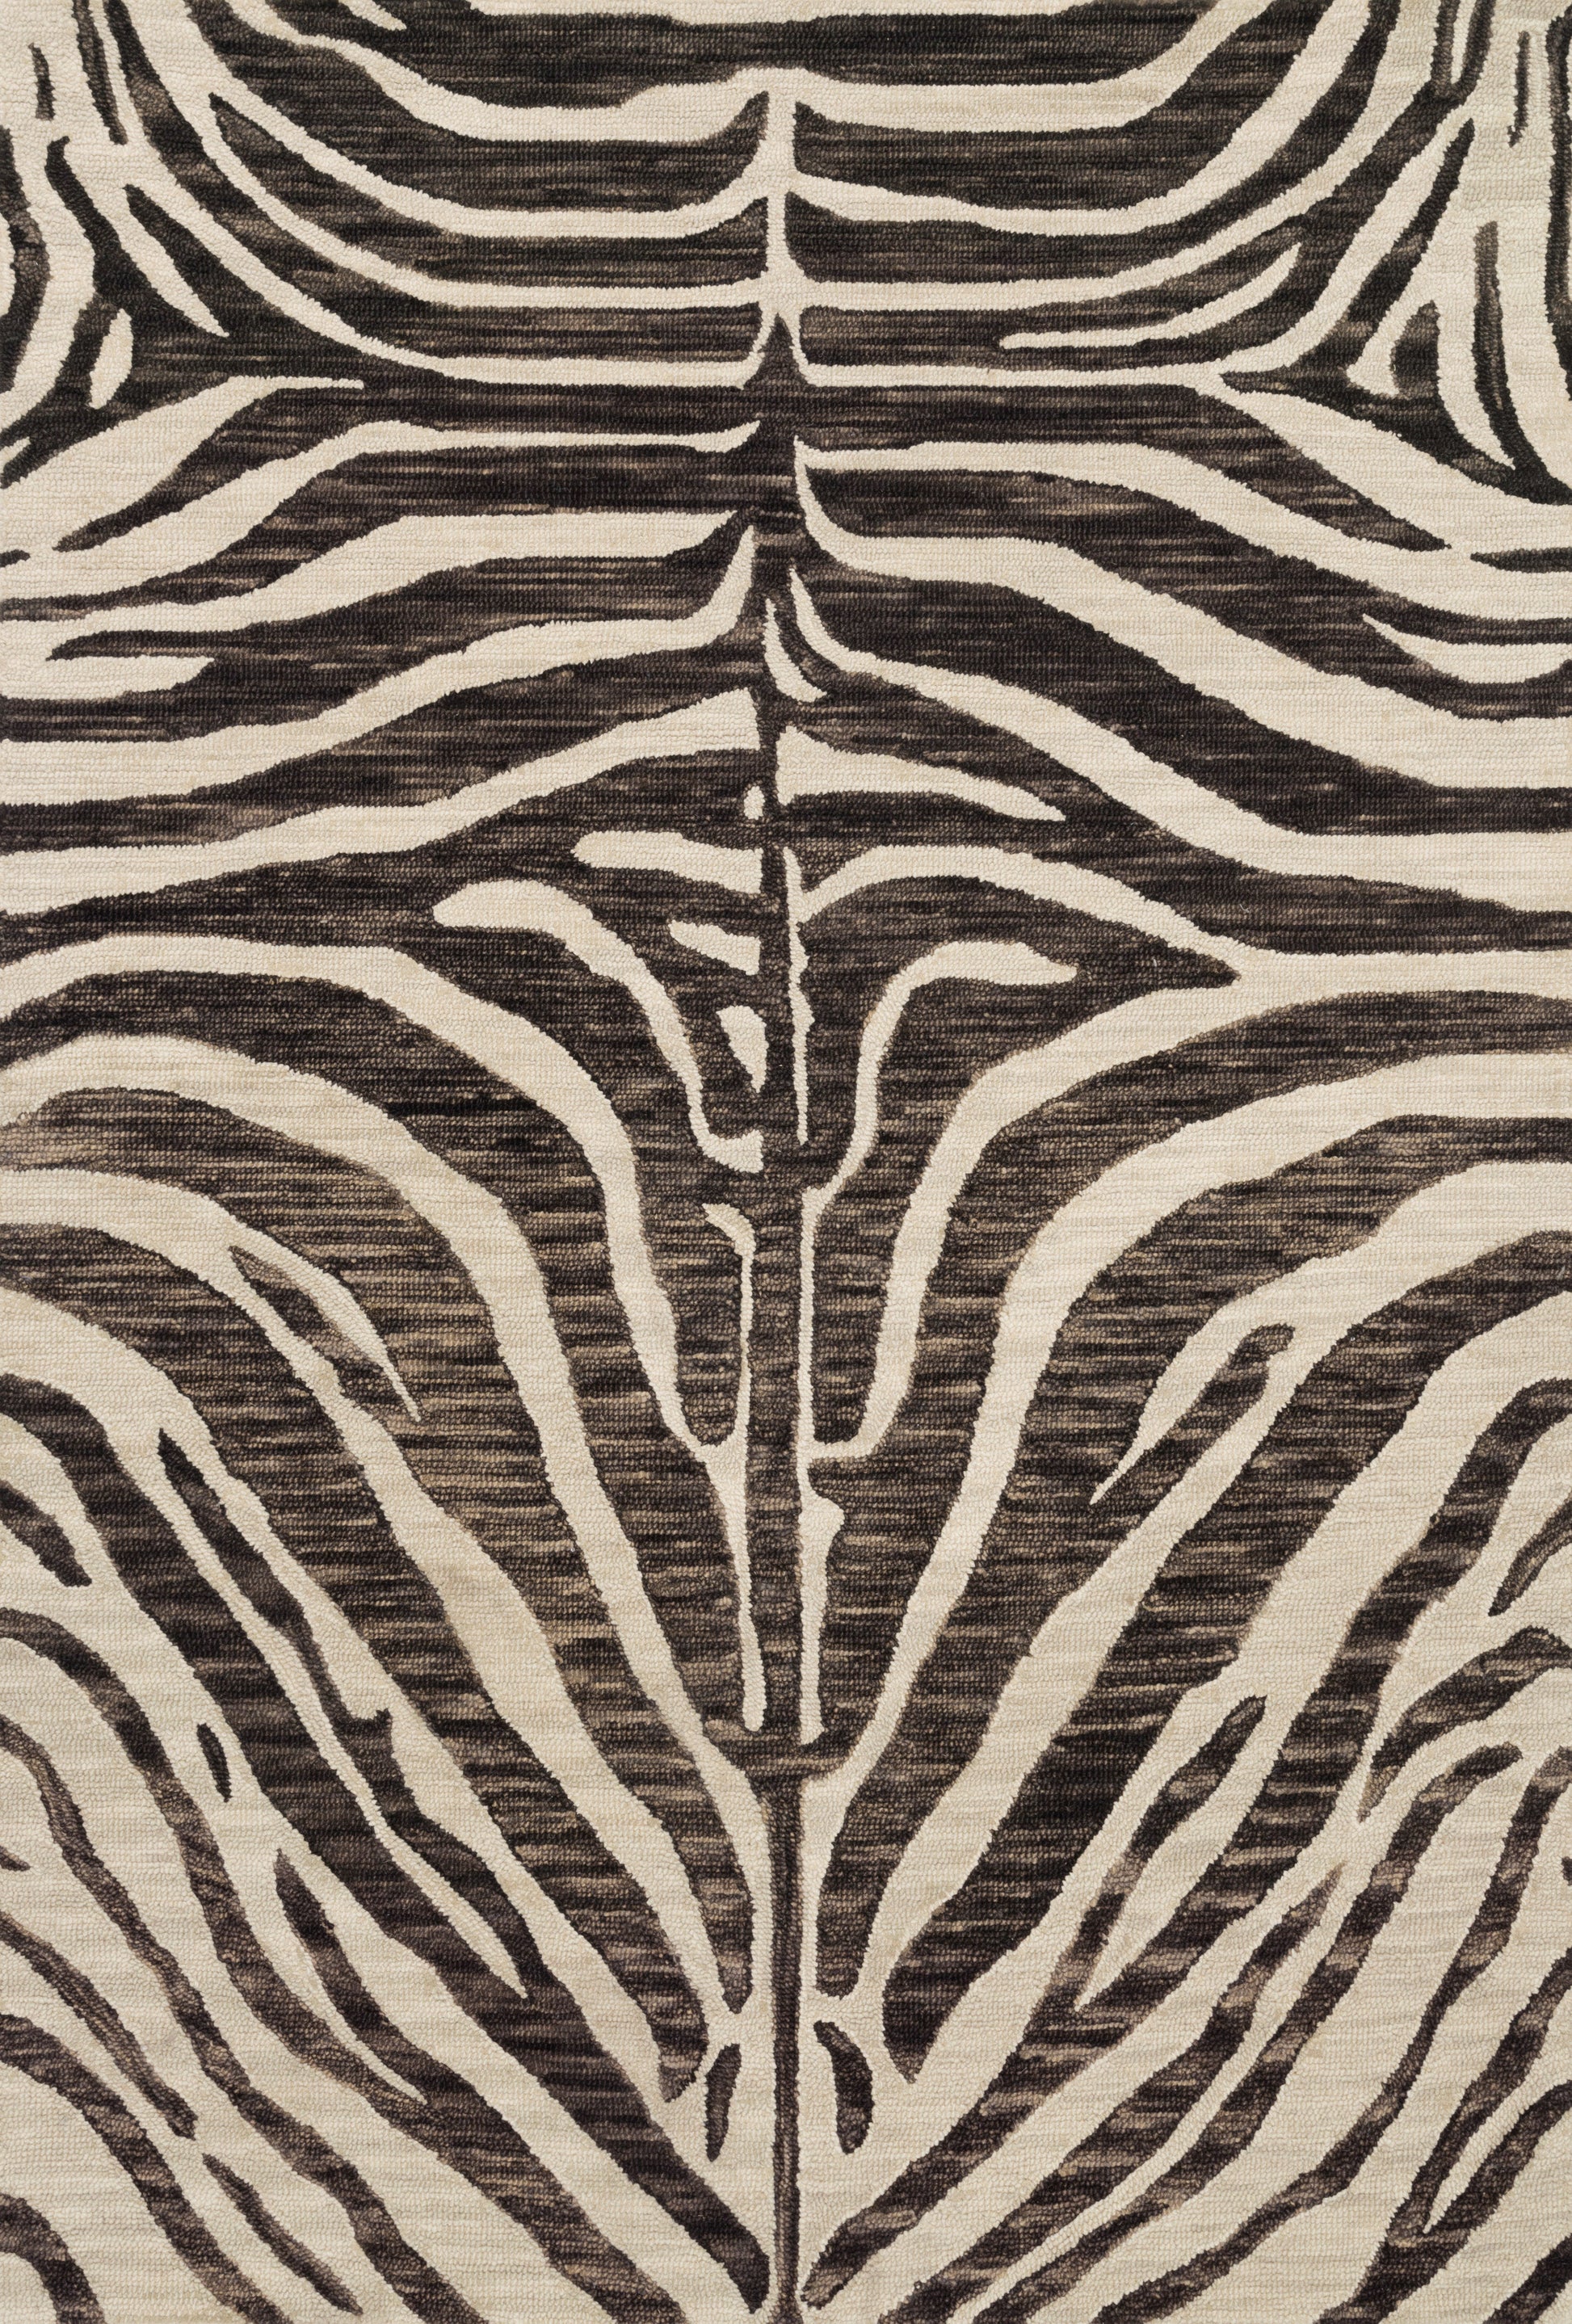 A picture of Loloi's Masai rug, in style MAS-01, color Java / Ivory